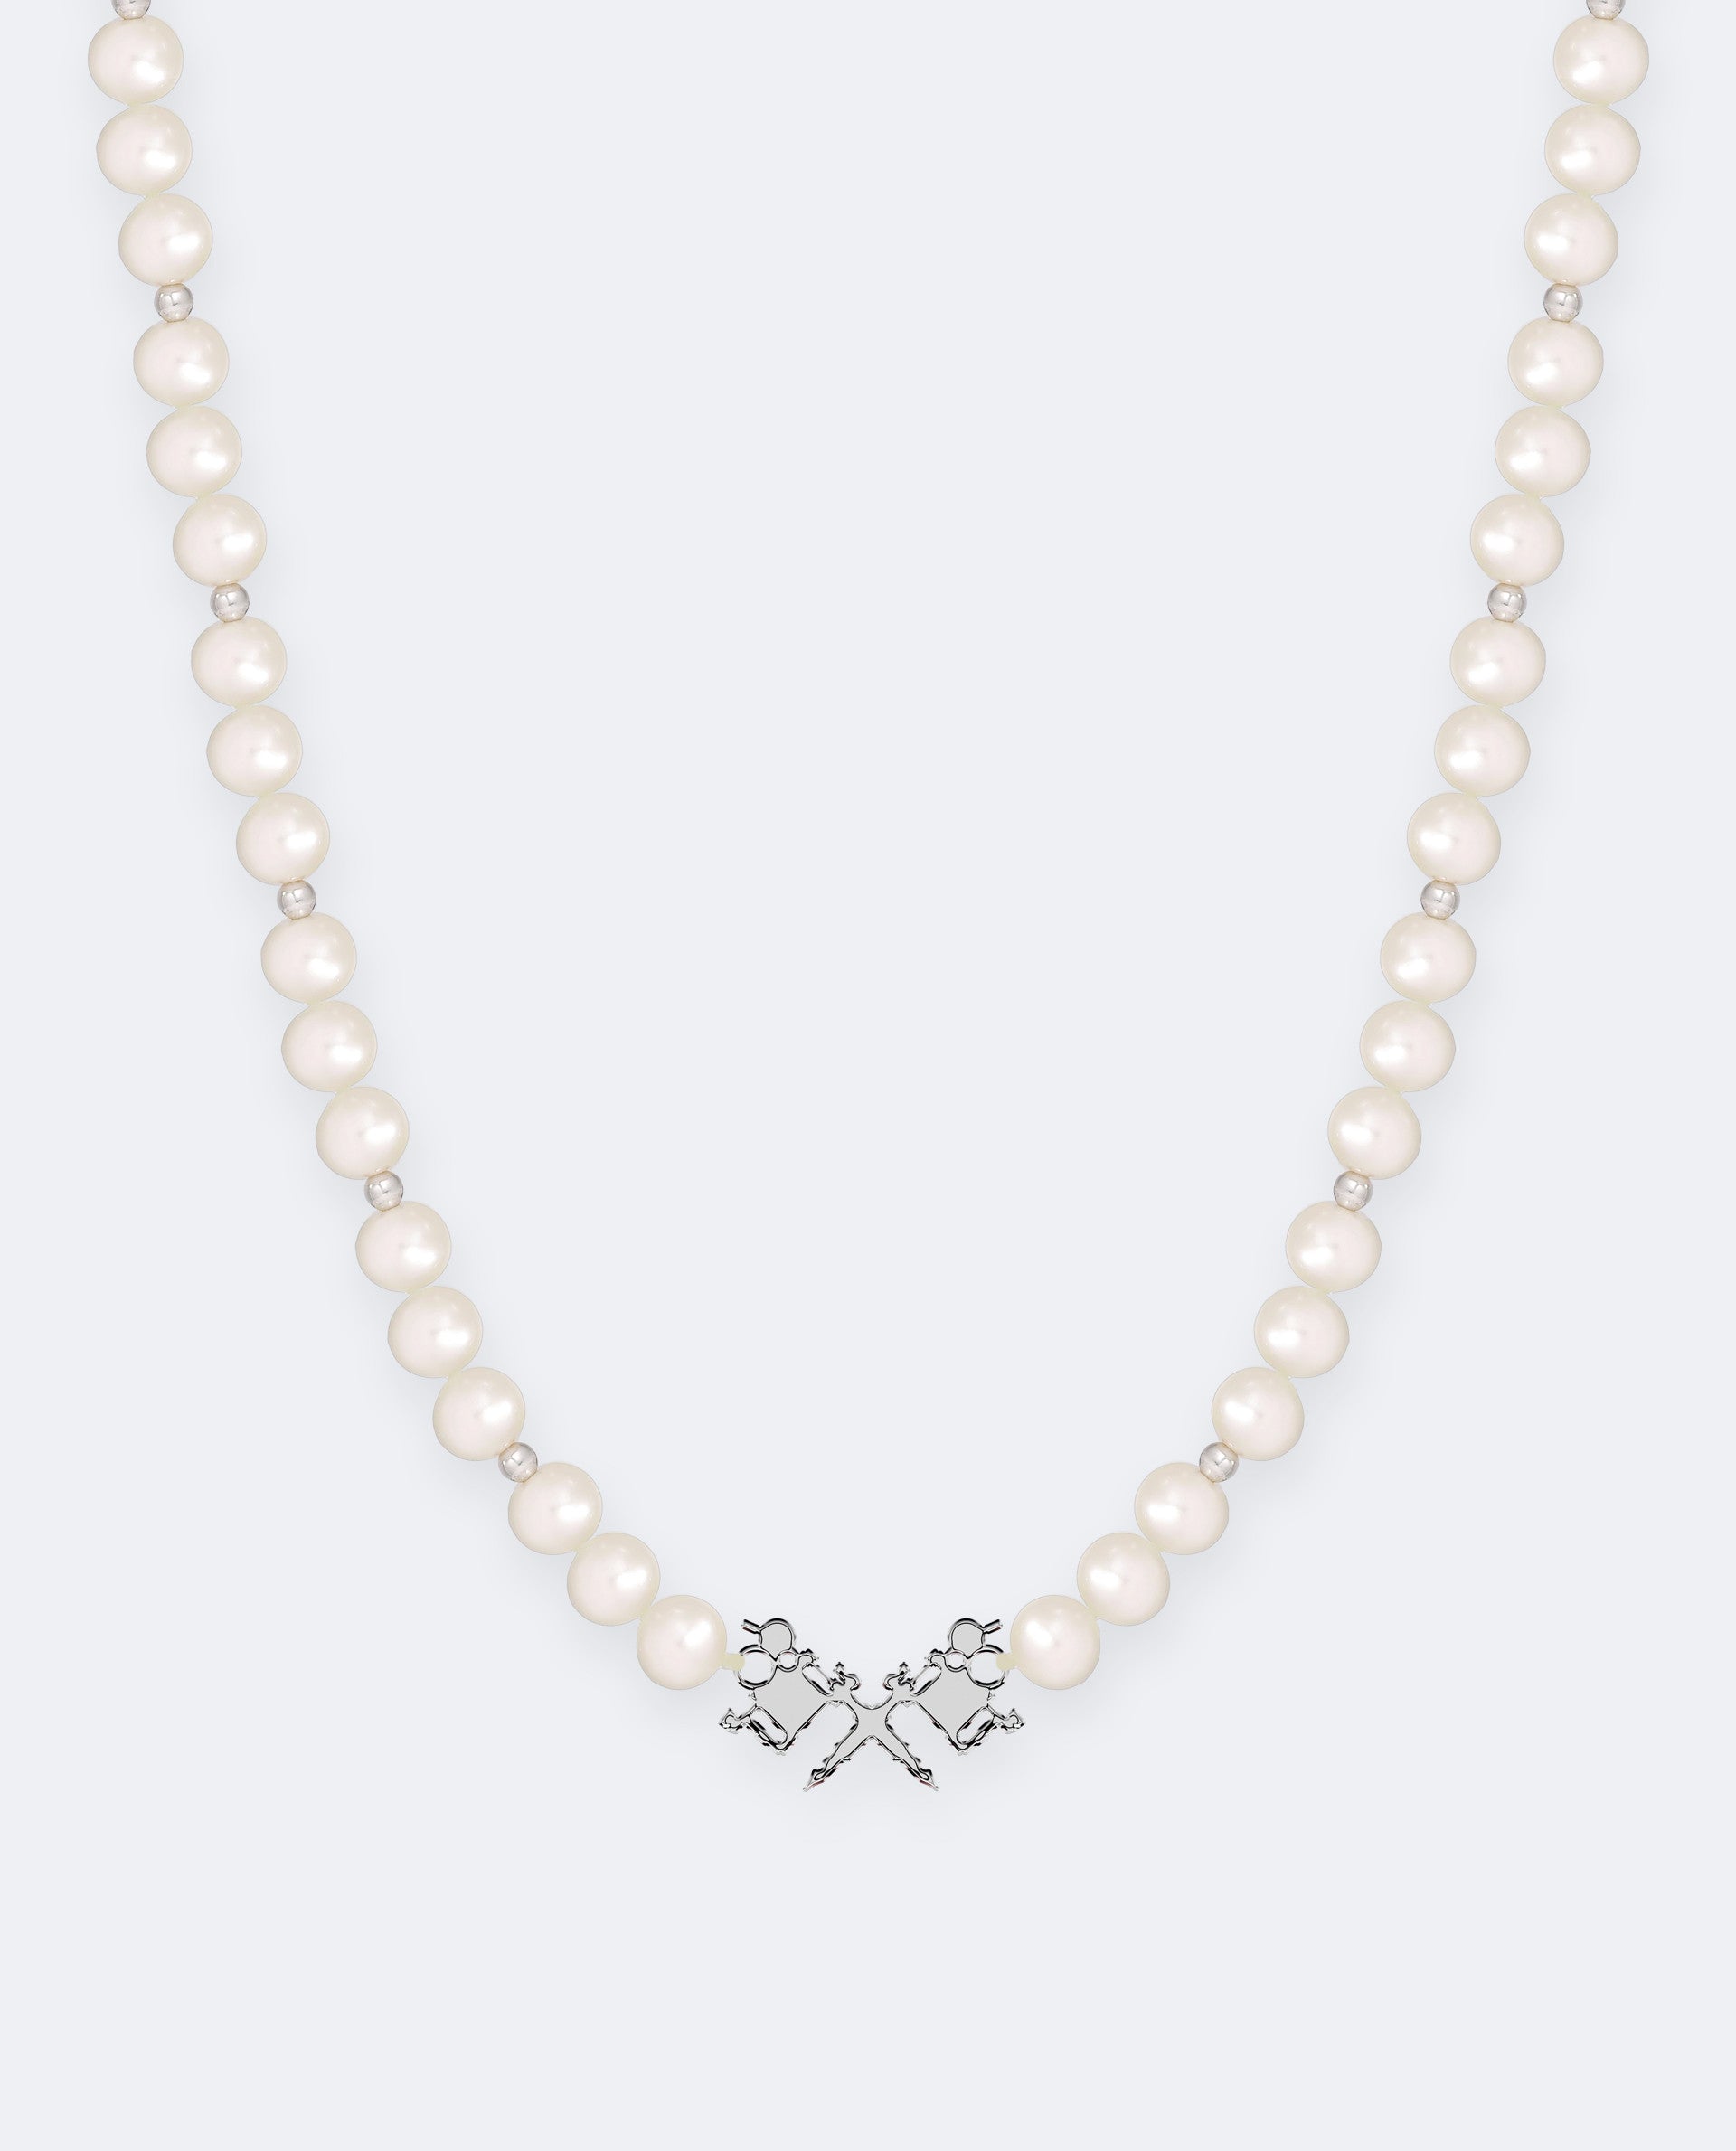 Root pearl necklace 46cm